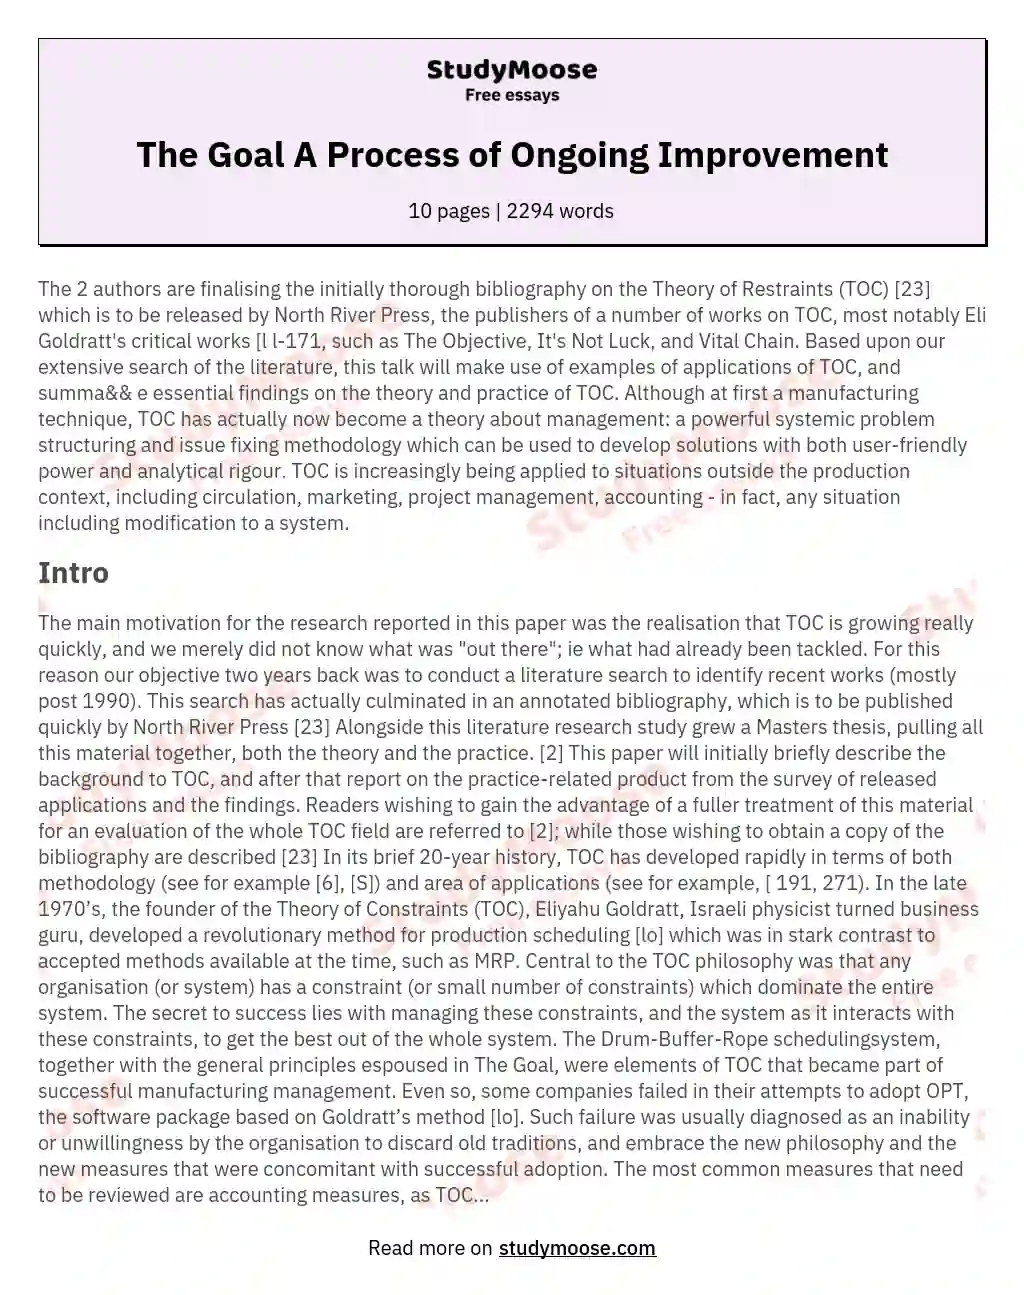 The Goal A Process of Ongoing Improvement essay